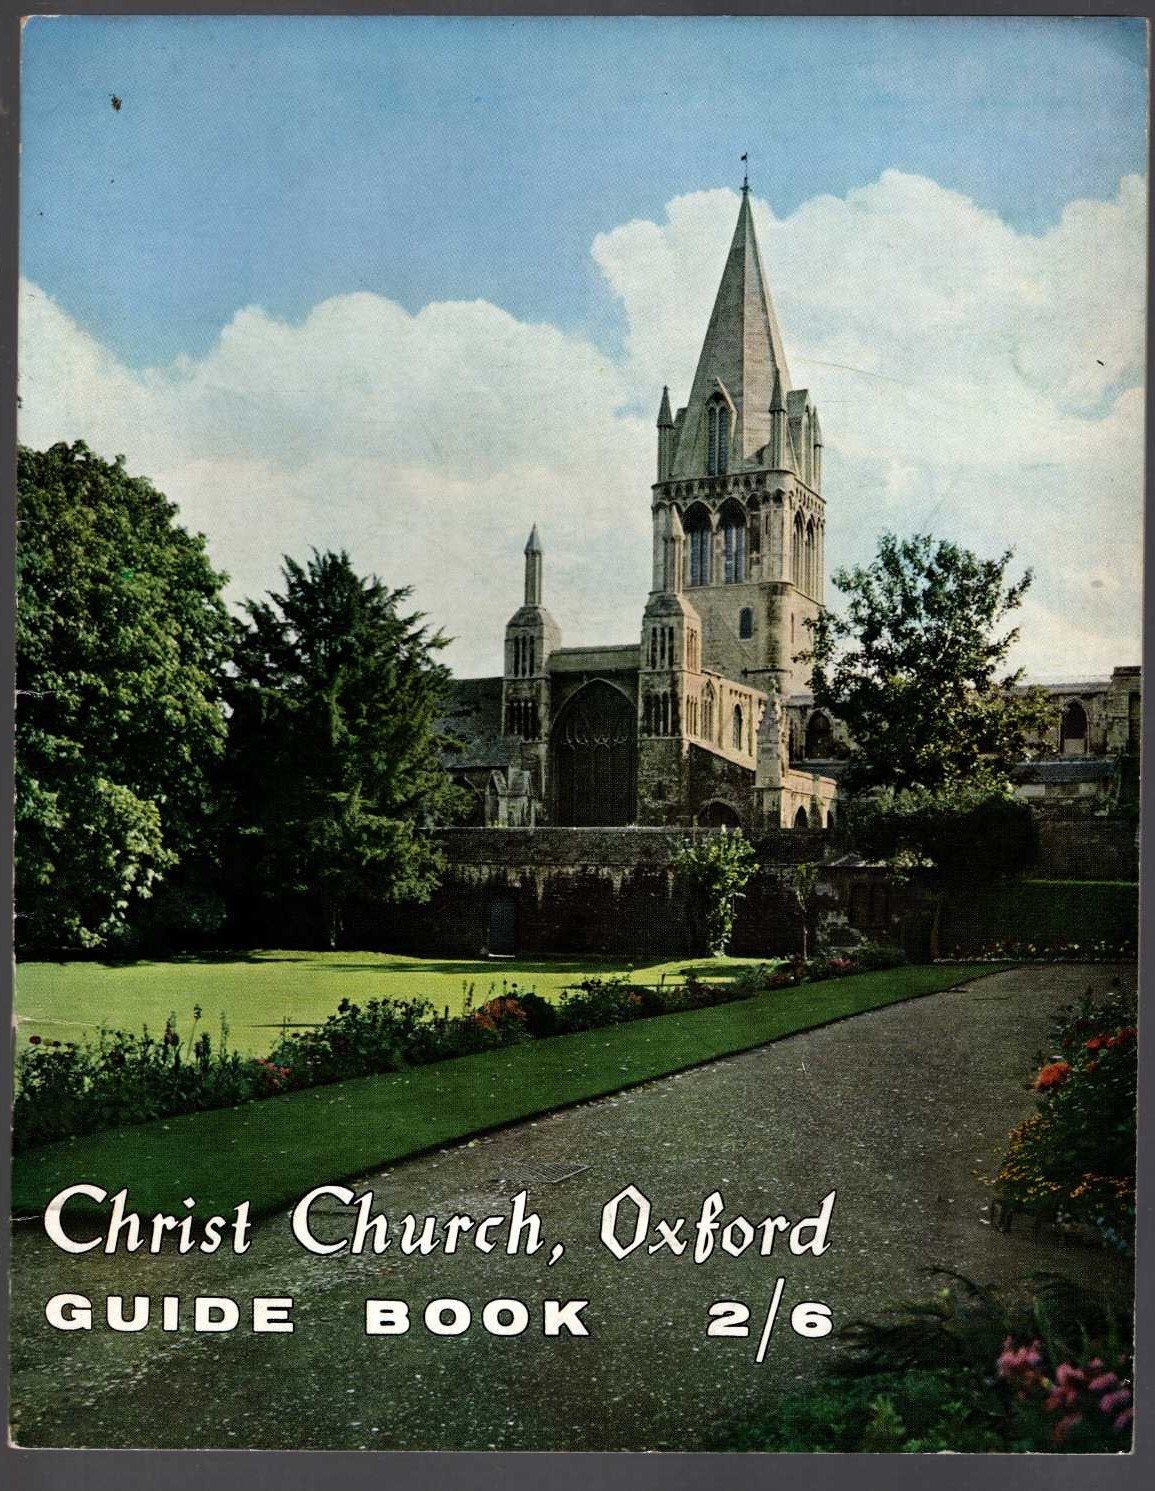 \ CHRIST CHURCH, OXFORD GUIDE BOOK by A.J.Watts front book cover image